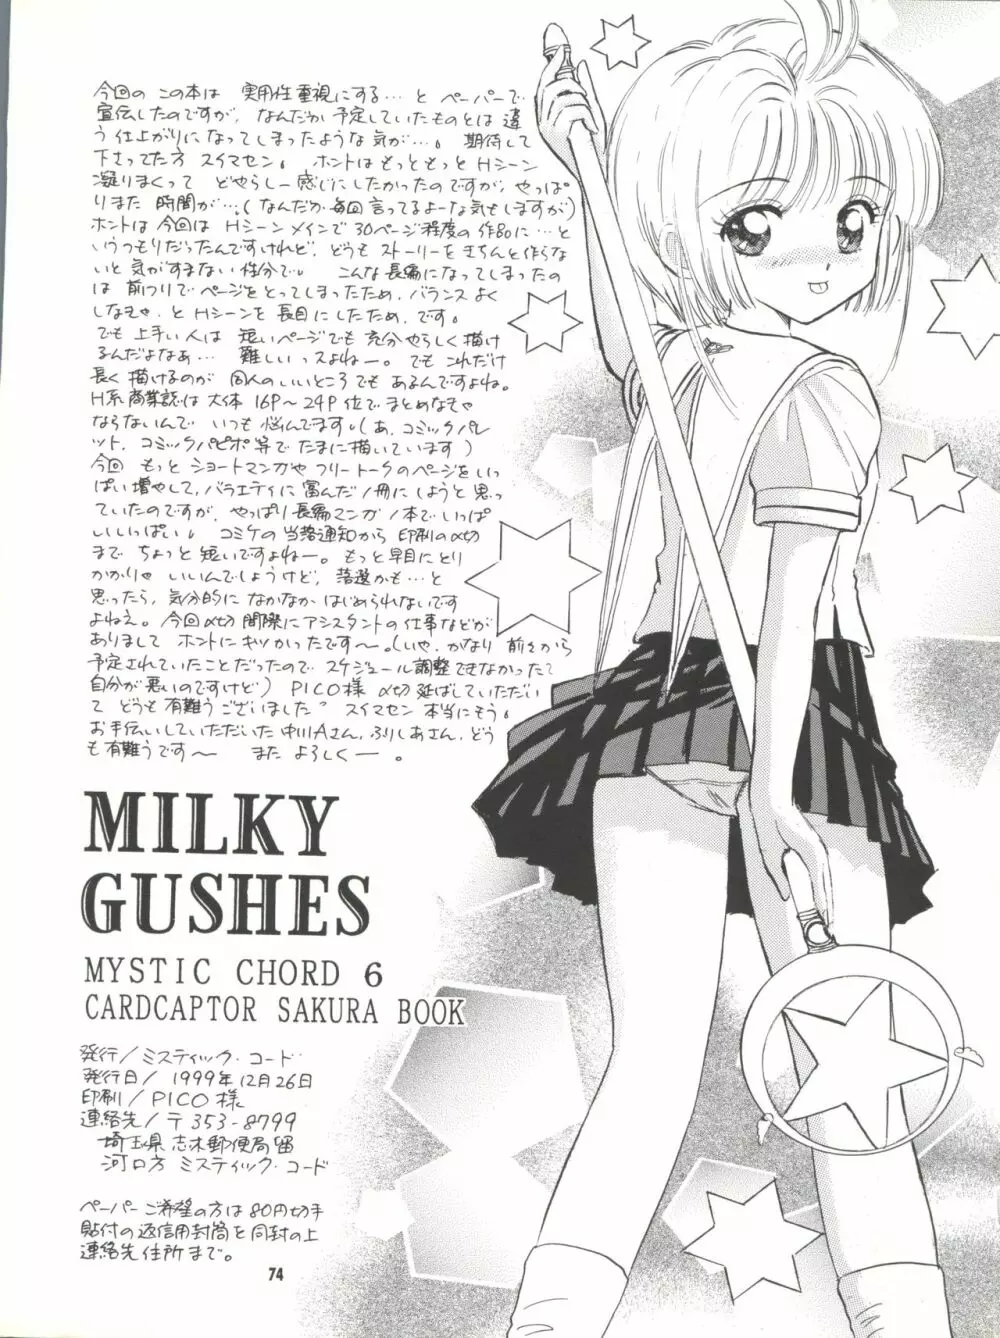 MILKY GUSHES 75ページ